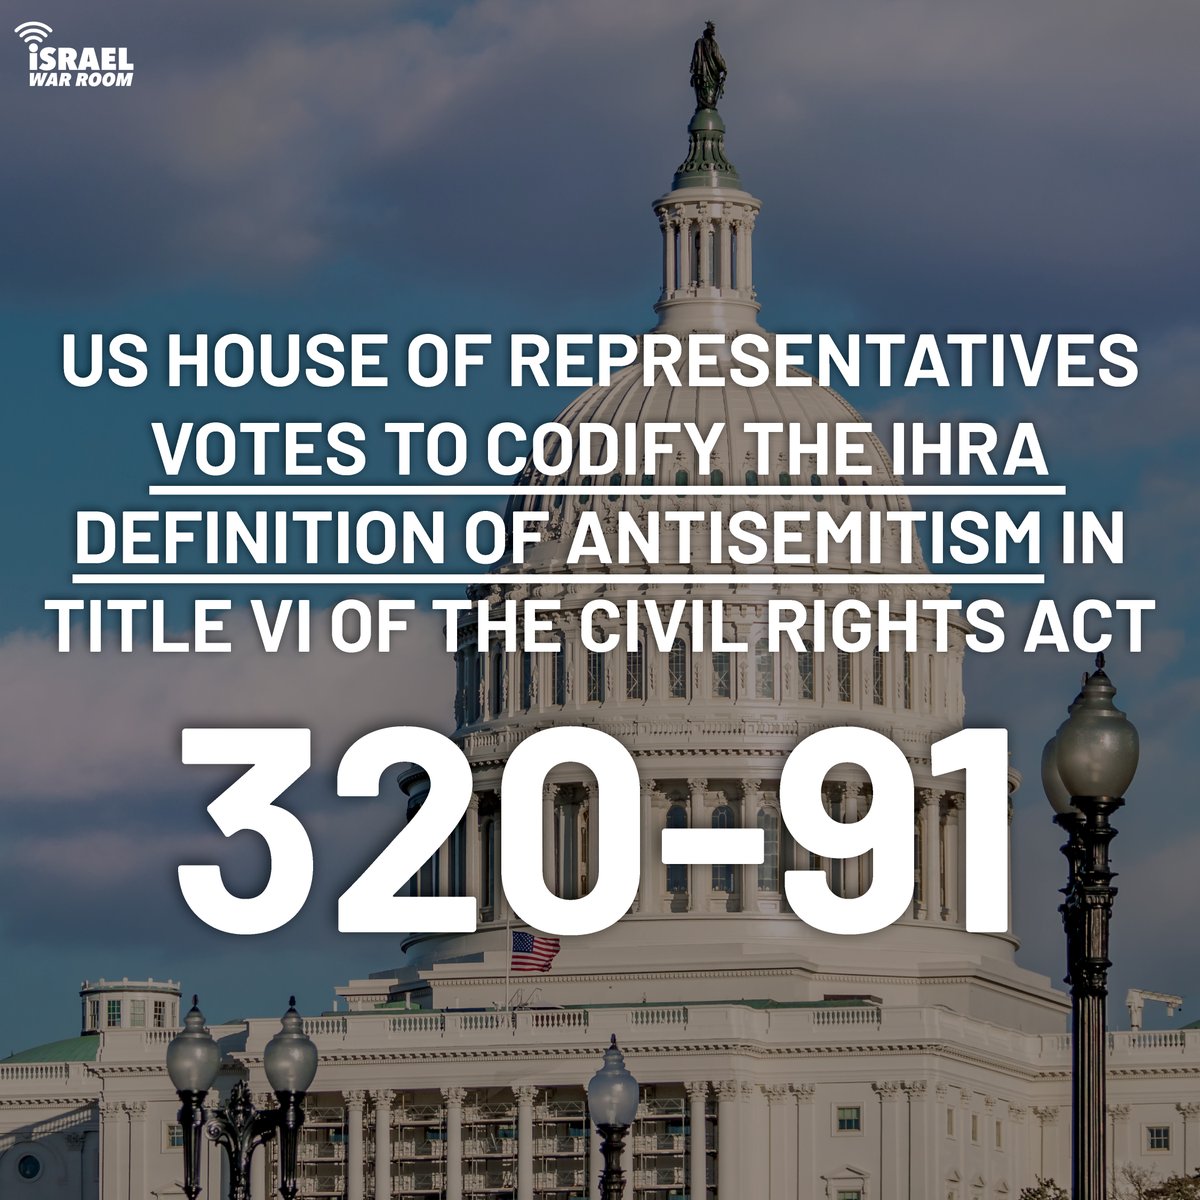 #BREAKING: The US House of Representatives has passed the antisemitism resolution, which seeks to codify @TheIHRA definition of antisemitism in Title VI of the Civil Rights Act of 1956 for the @usedgov to use to enforce anti-discrimination laws.